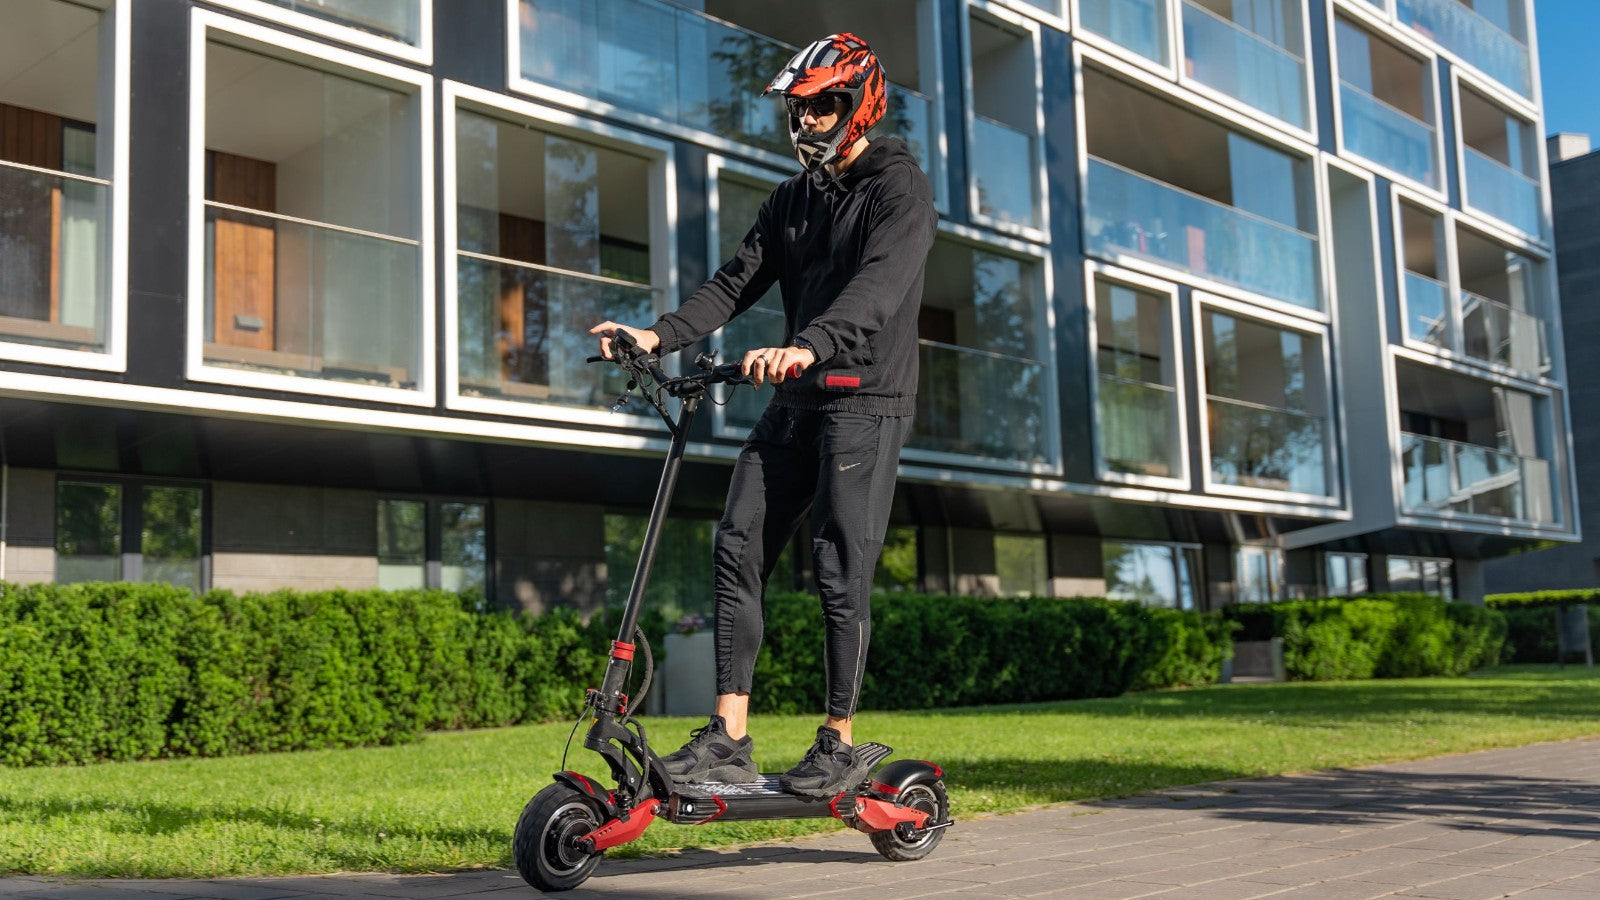 From Cruising to Commuting: How Electric Scooters with Seat Are Changing Transportation